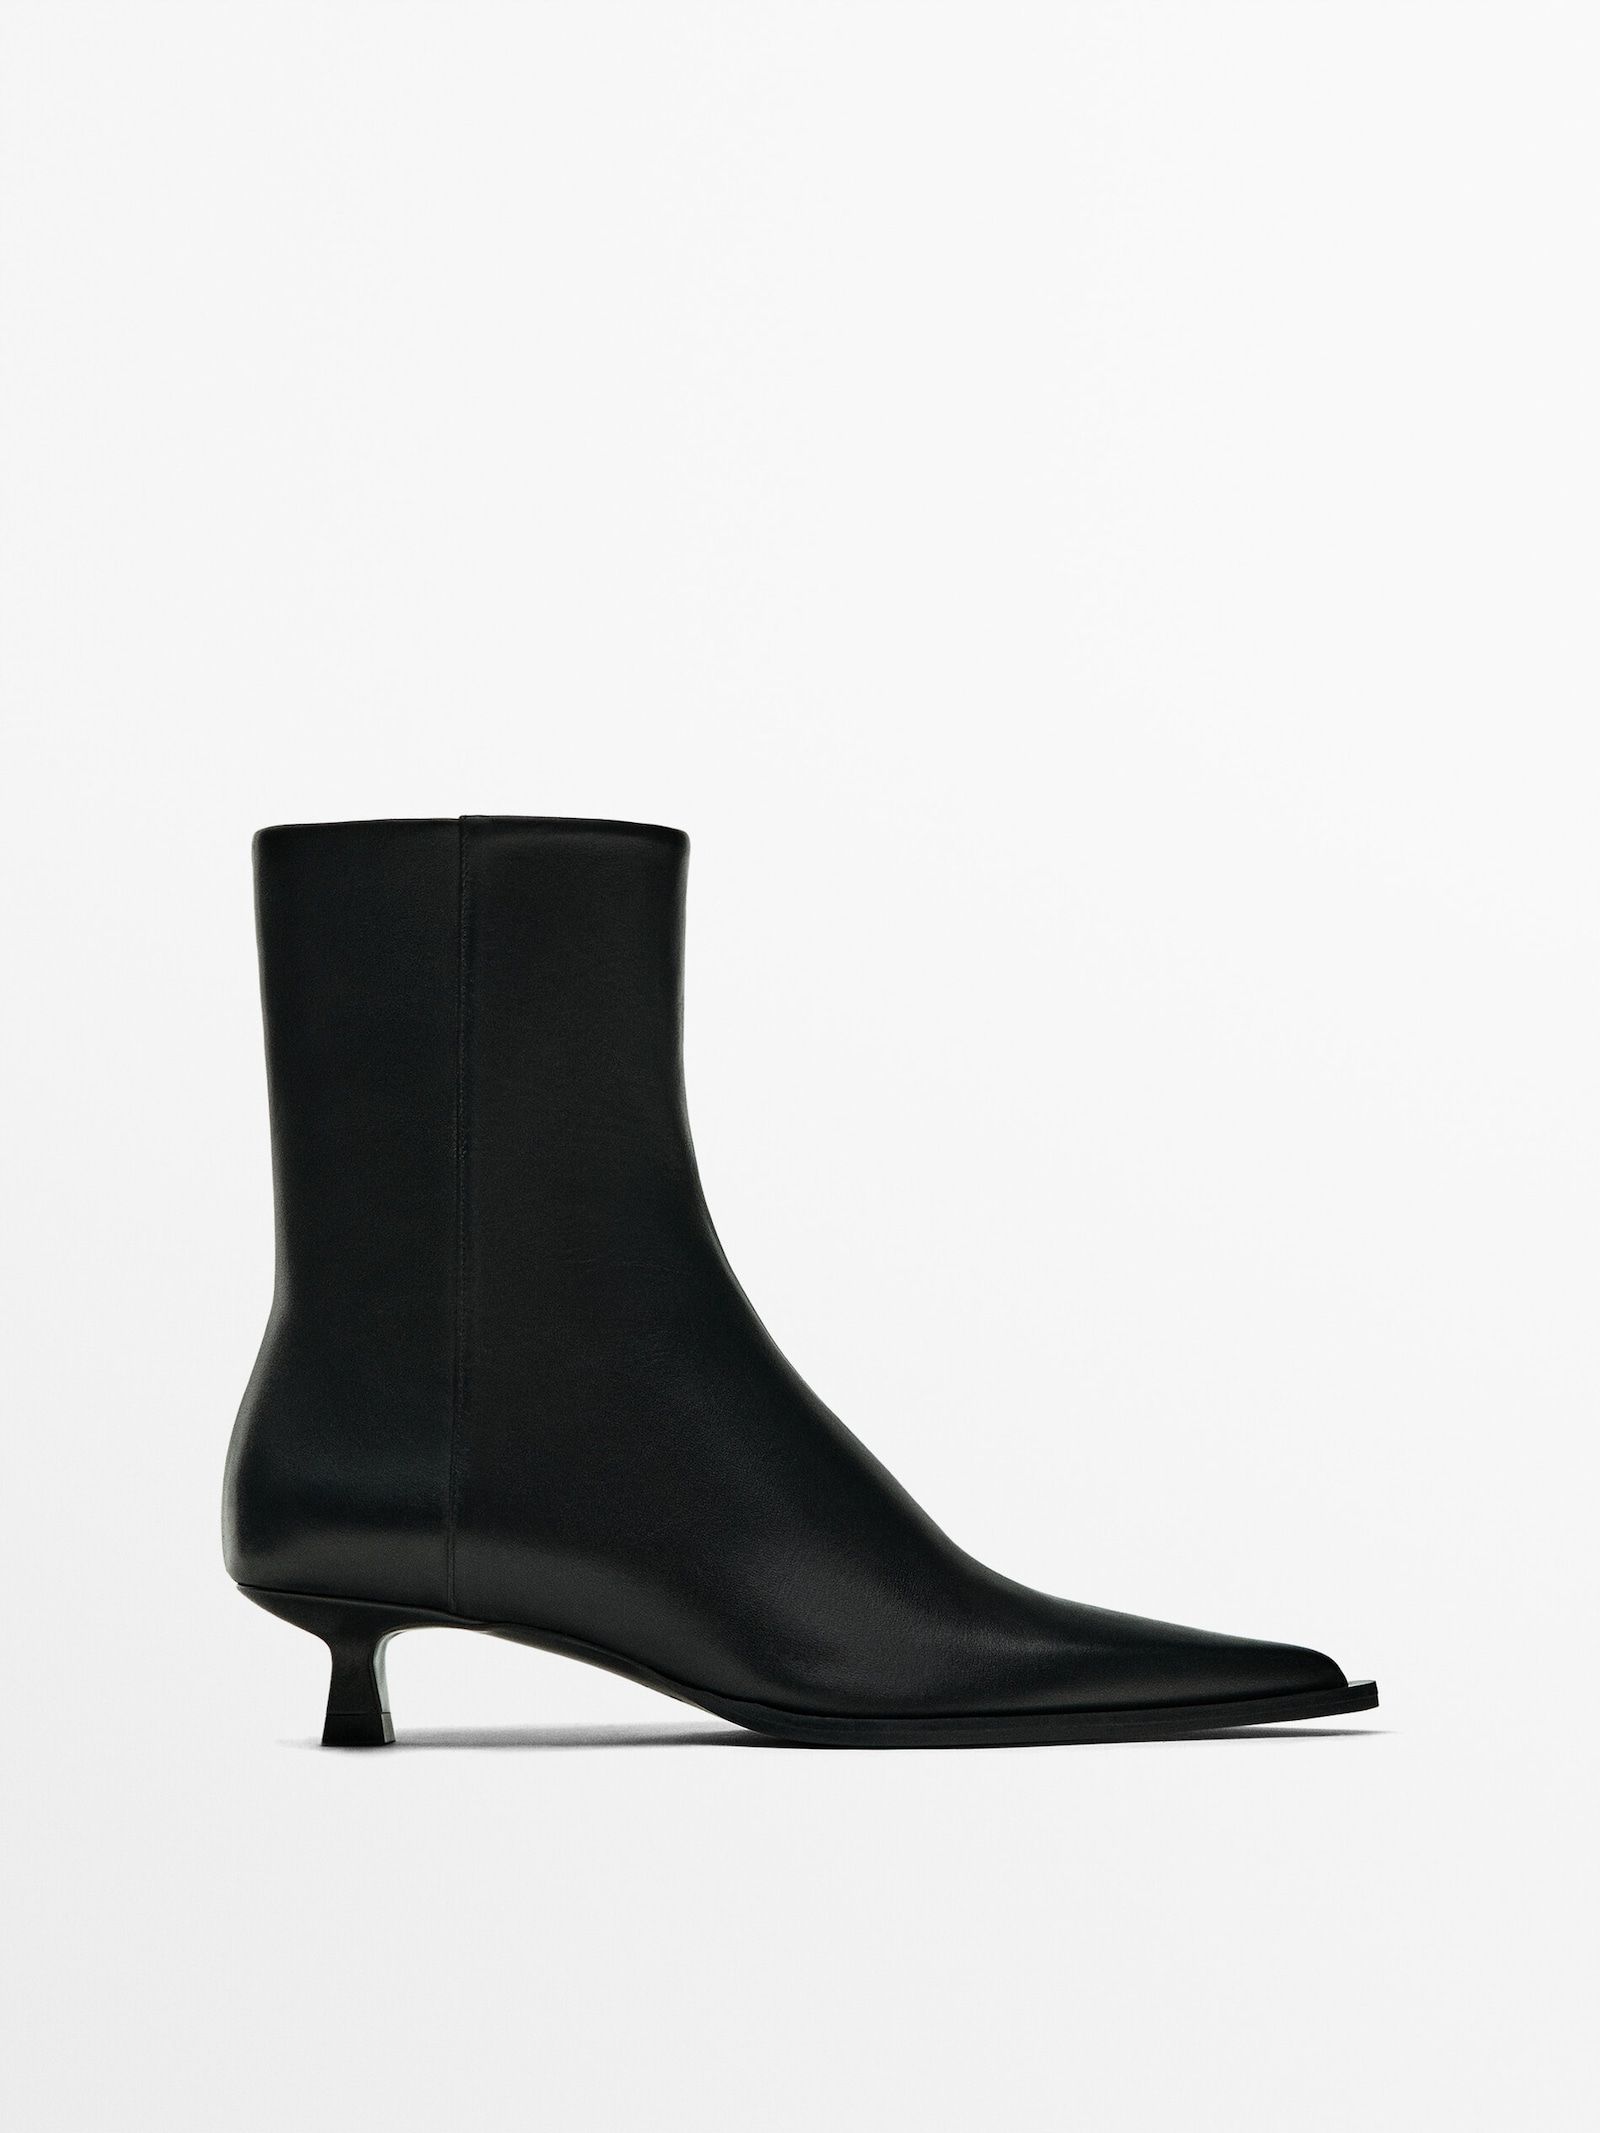 Heeled ankle boots with welt detail | Massimo Dutti UK